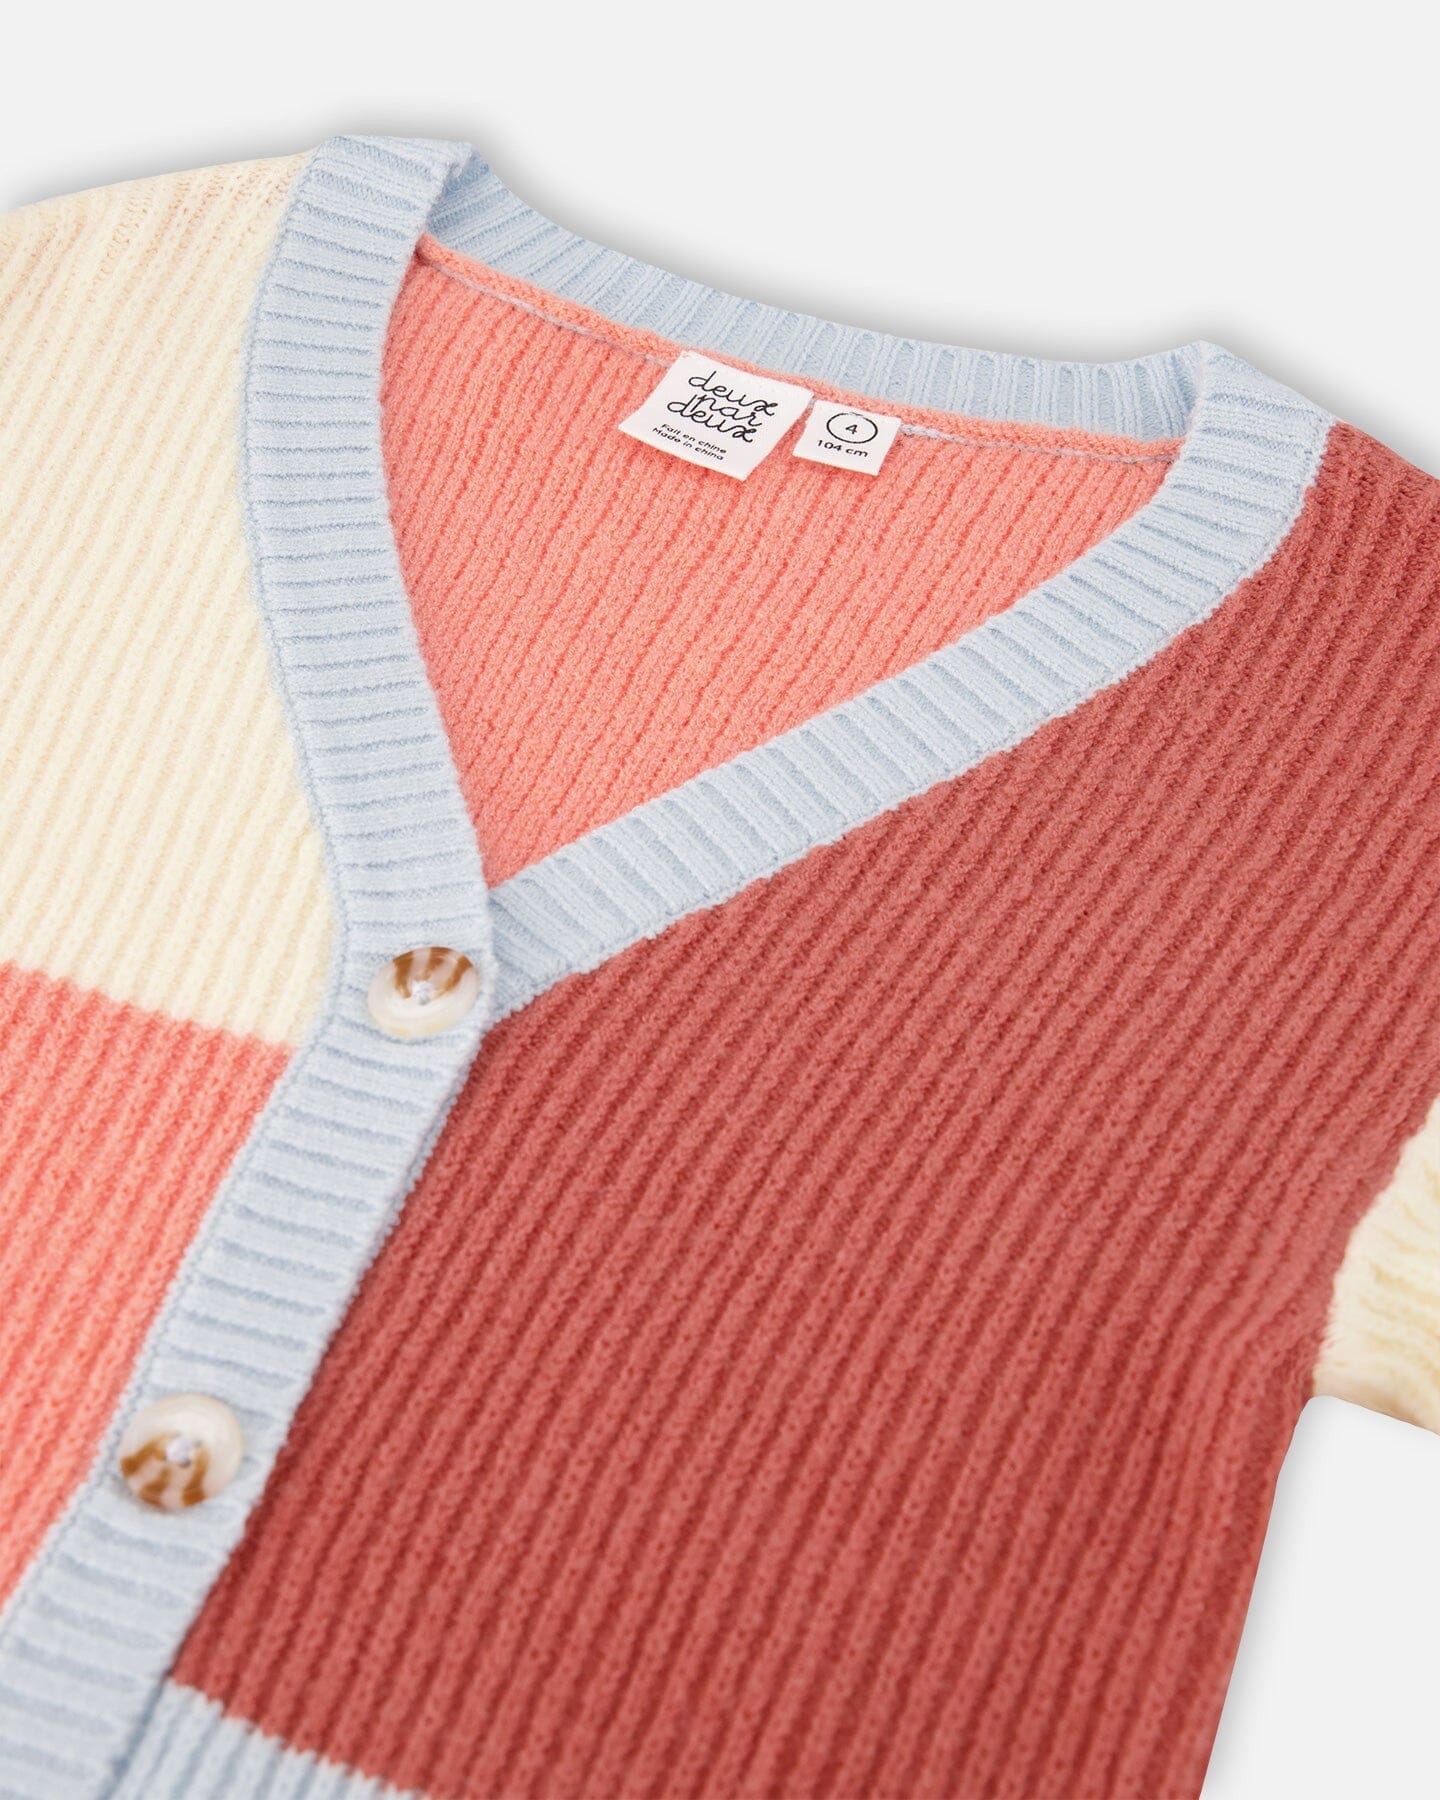 Color Block Knitted Cardigan Salmon Pink, Sky, Terra Cotta - F20KT32_000